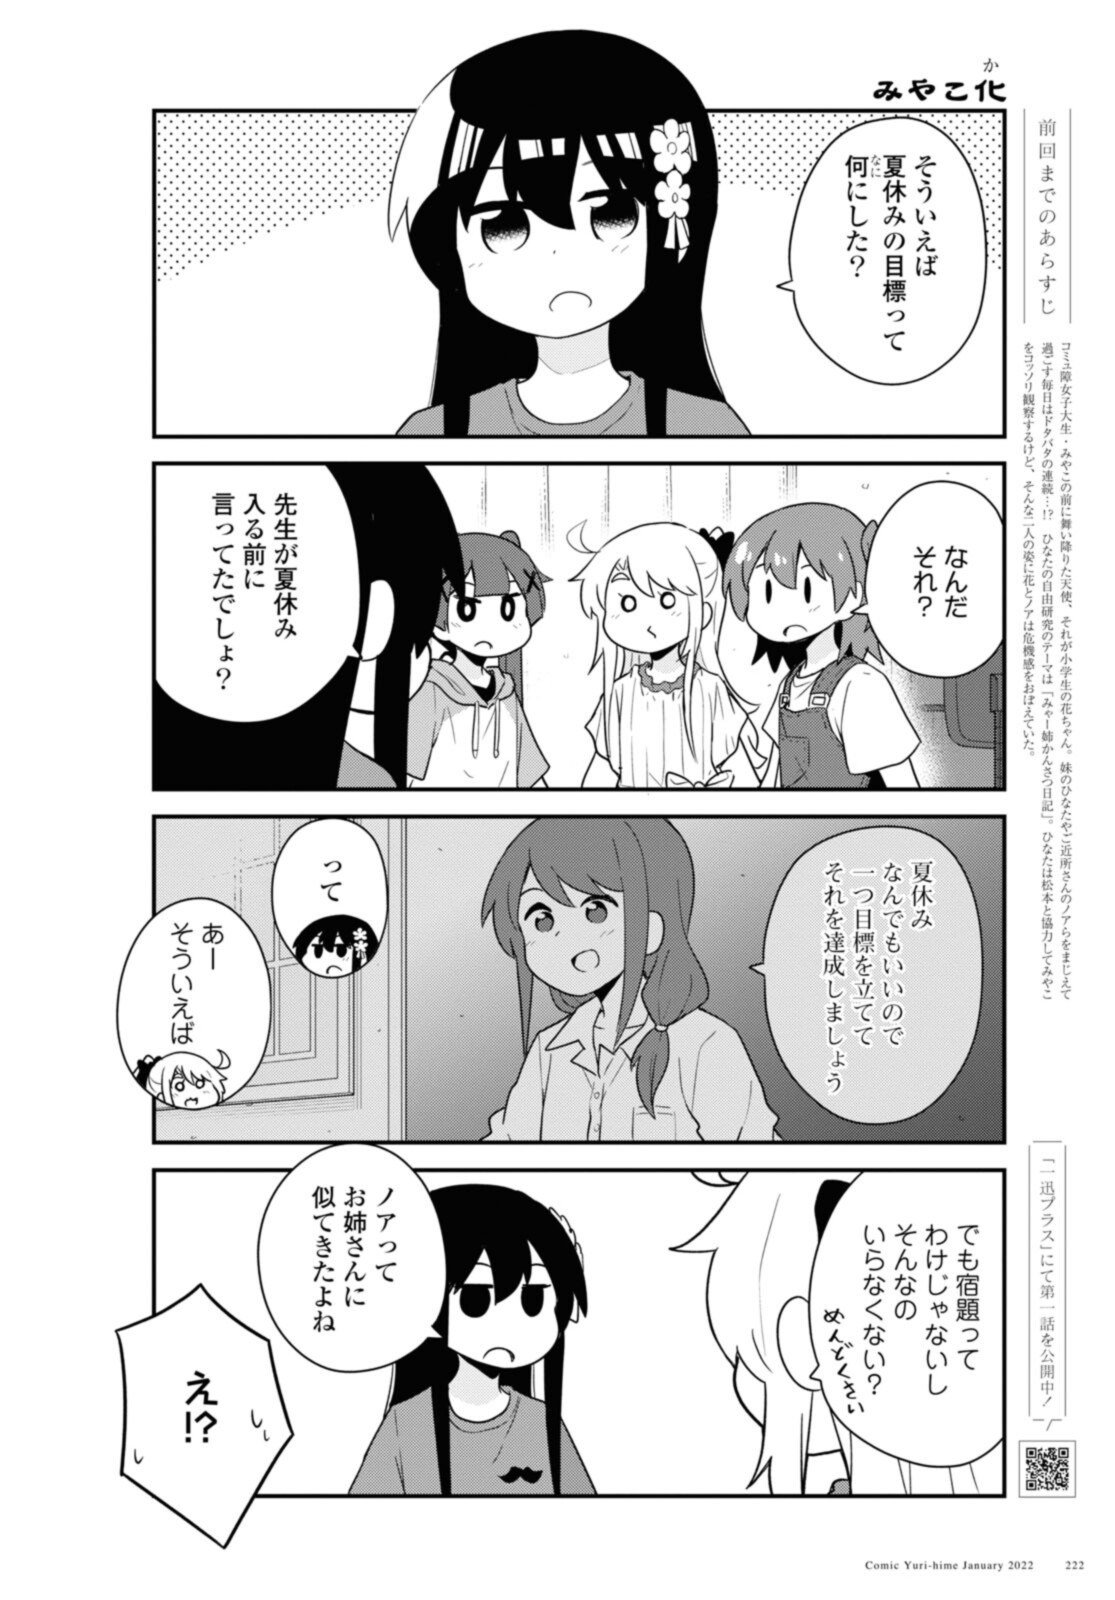 Wataten! An Angel Flew Down to Me 私に天使が舞い降りた！ 第91話 - Page 2